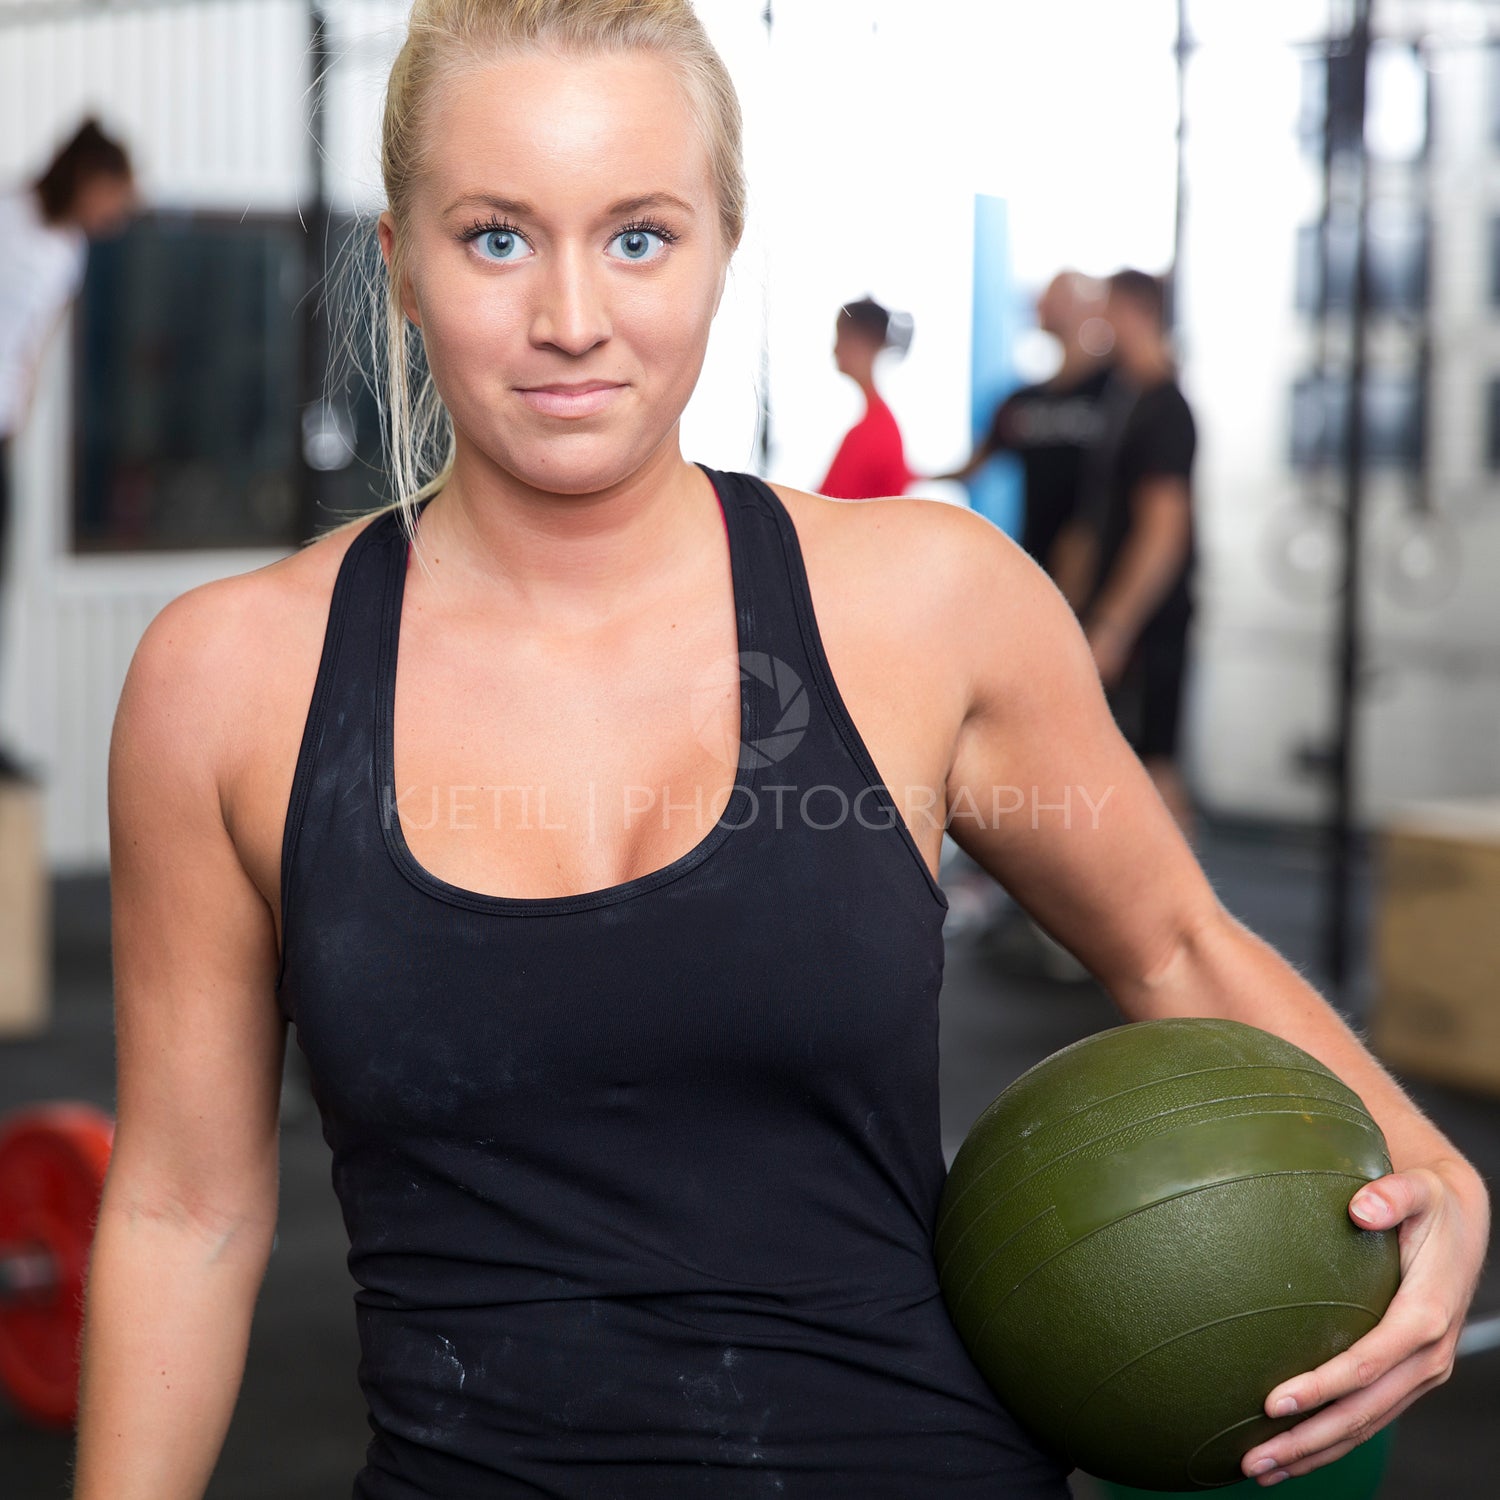 Smiling young woman with slam ball at gym center